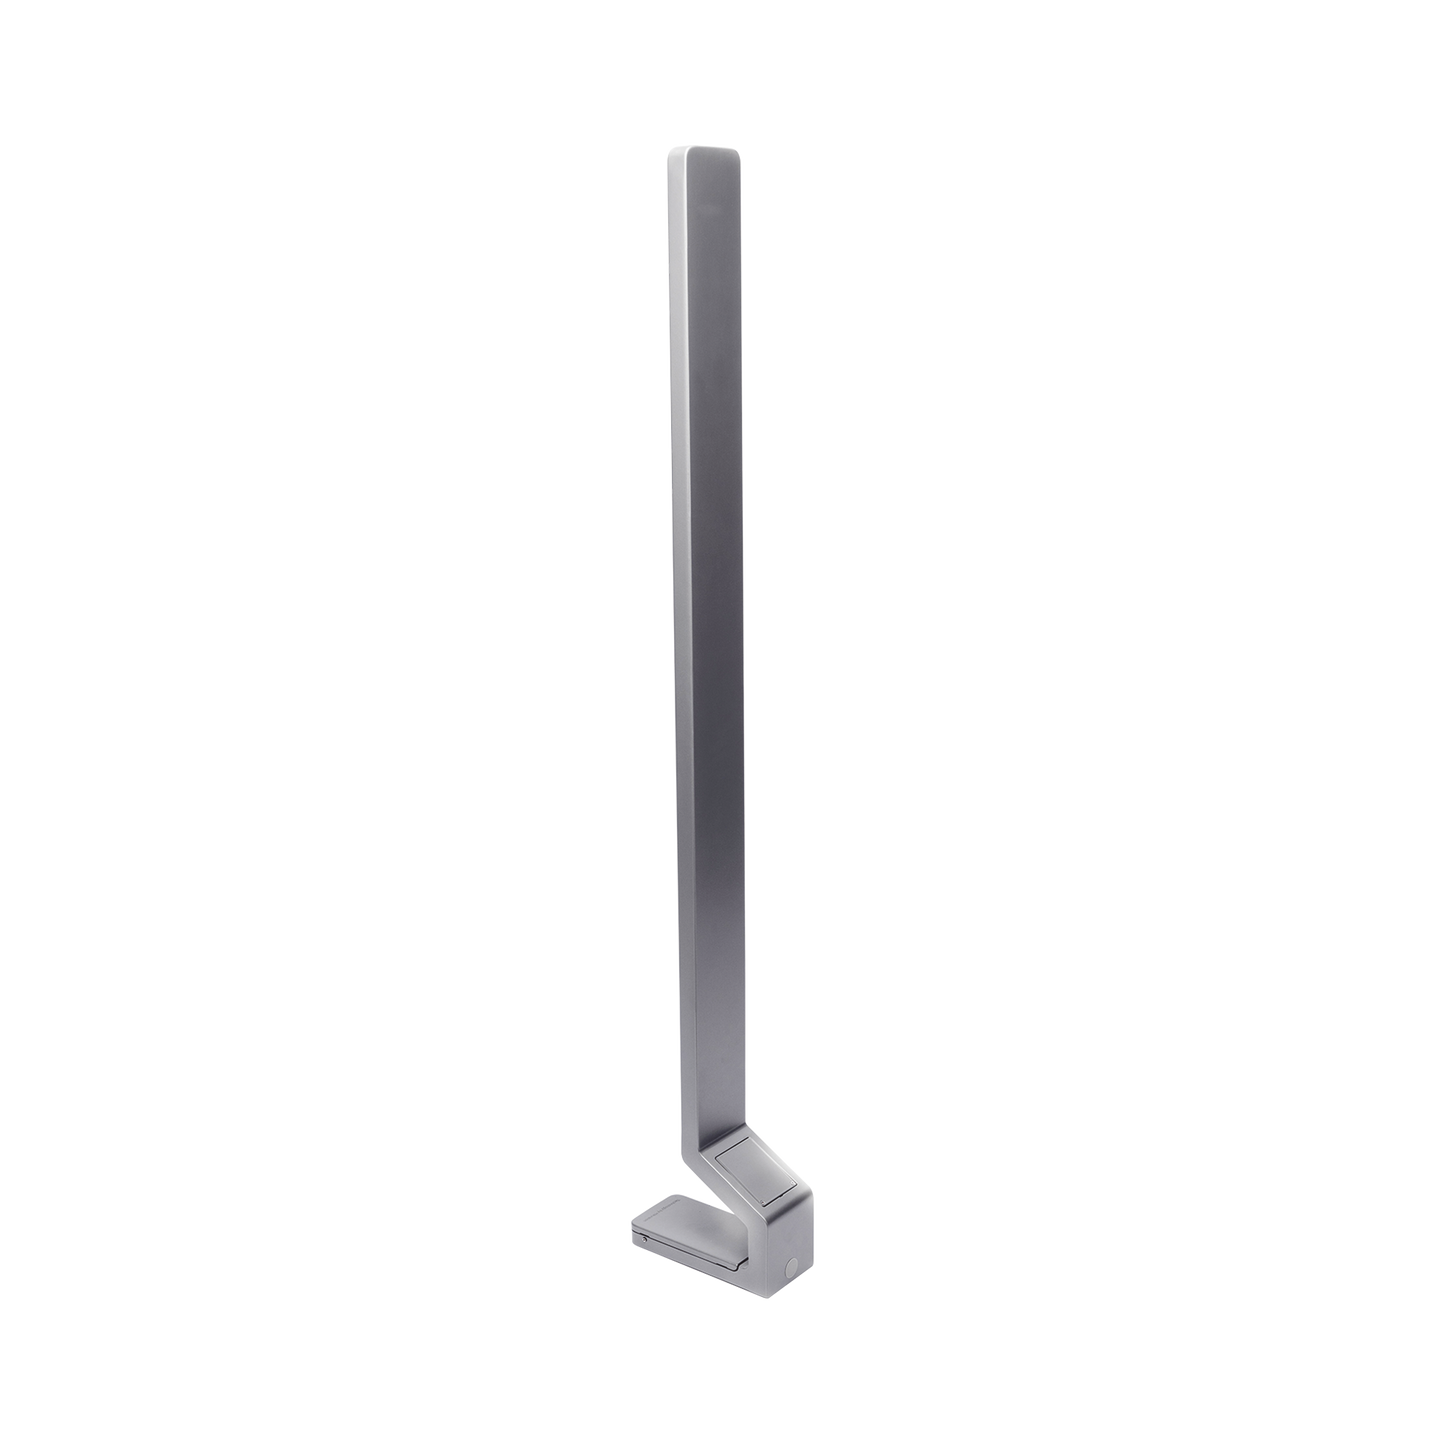 Floor Mounting Pole for HIKVISION Facial Recognition of the Series DSK1T607 and DSK1T671